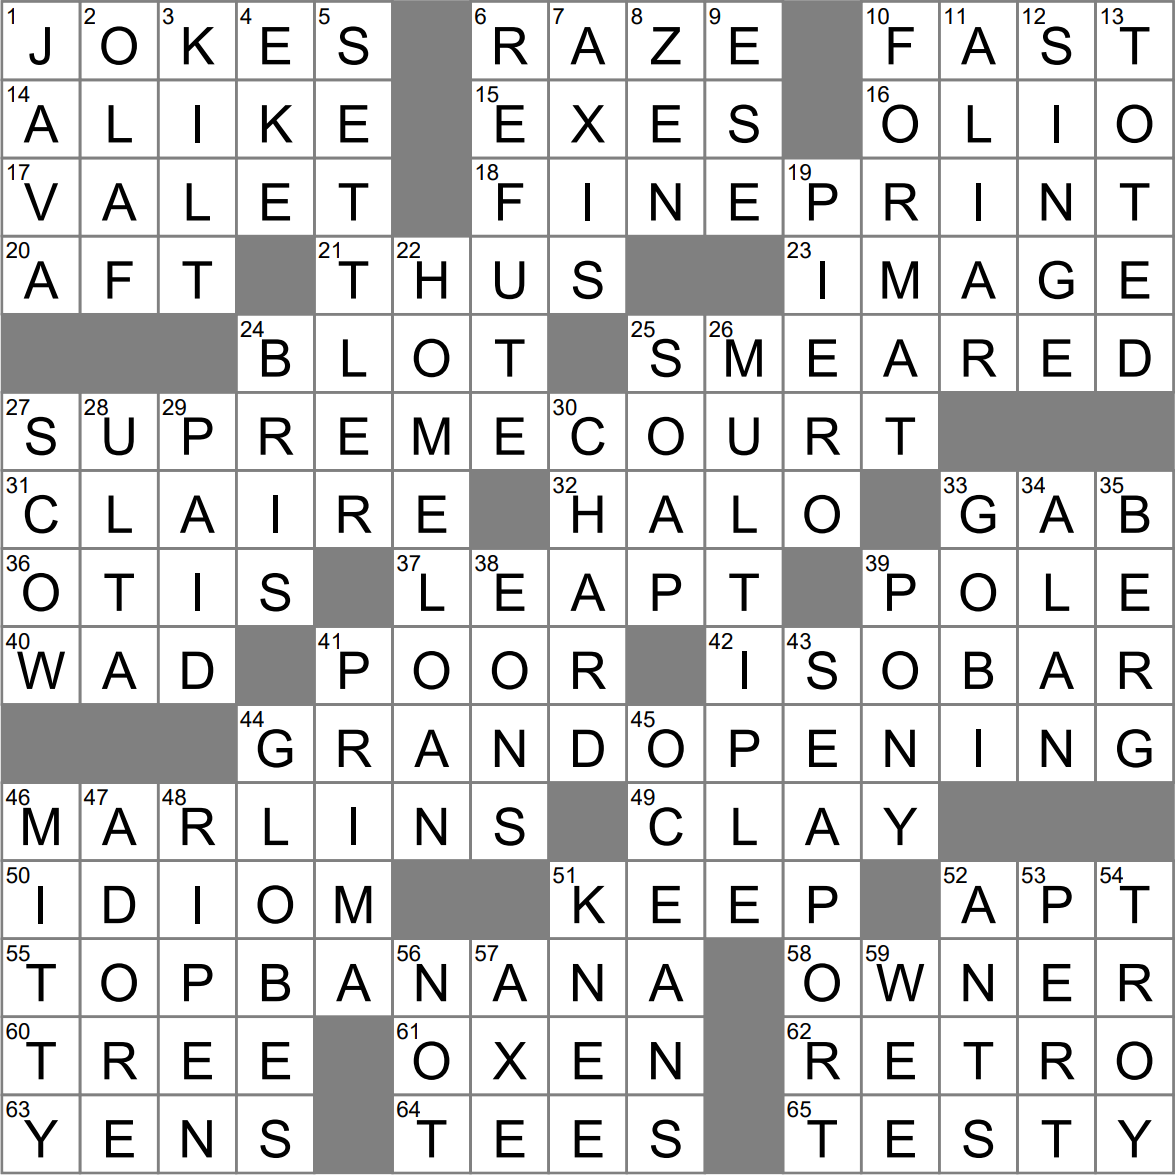 Donald Glover's role crossword clue Archives